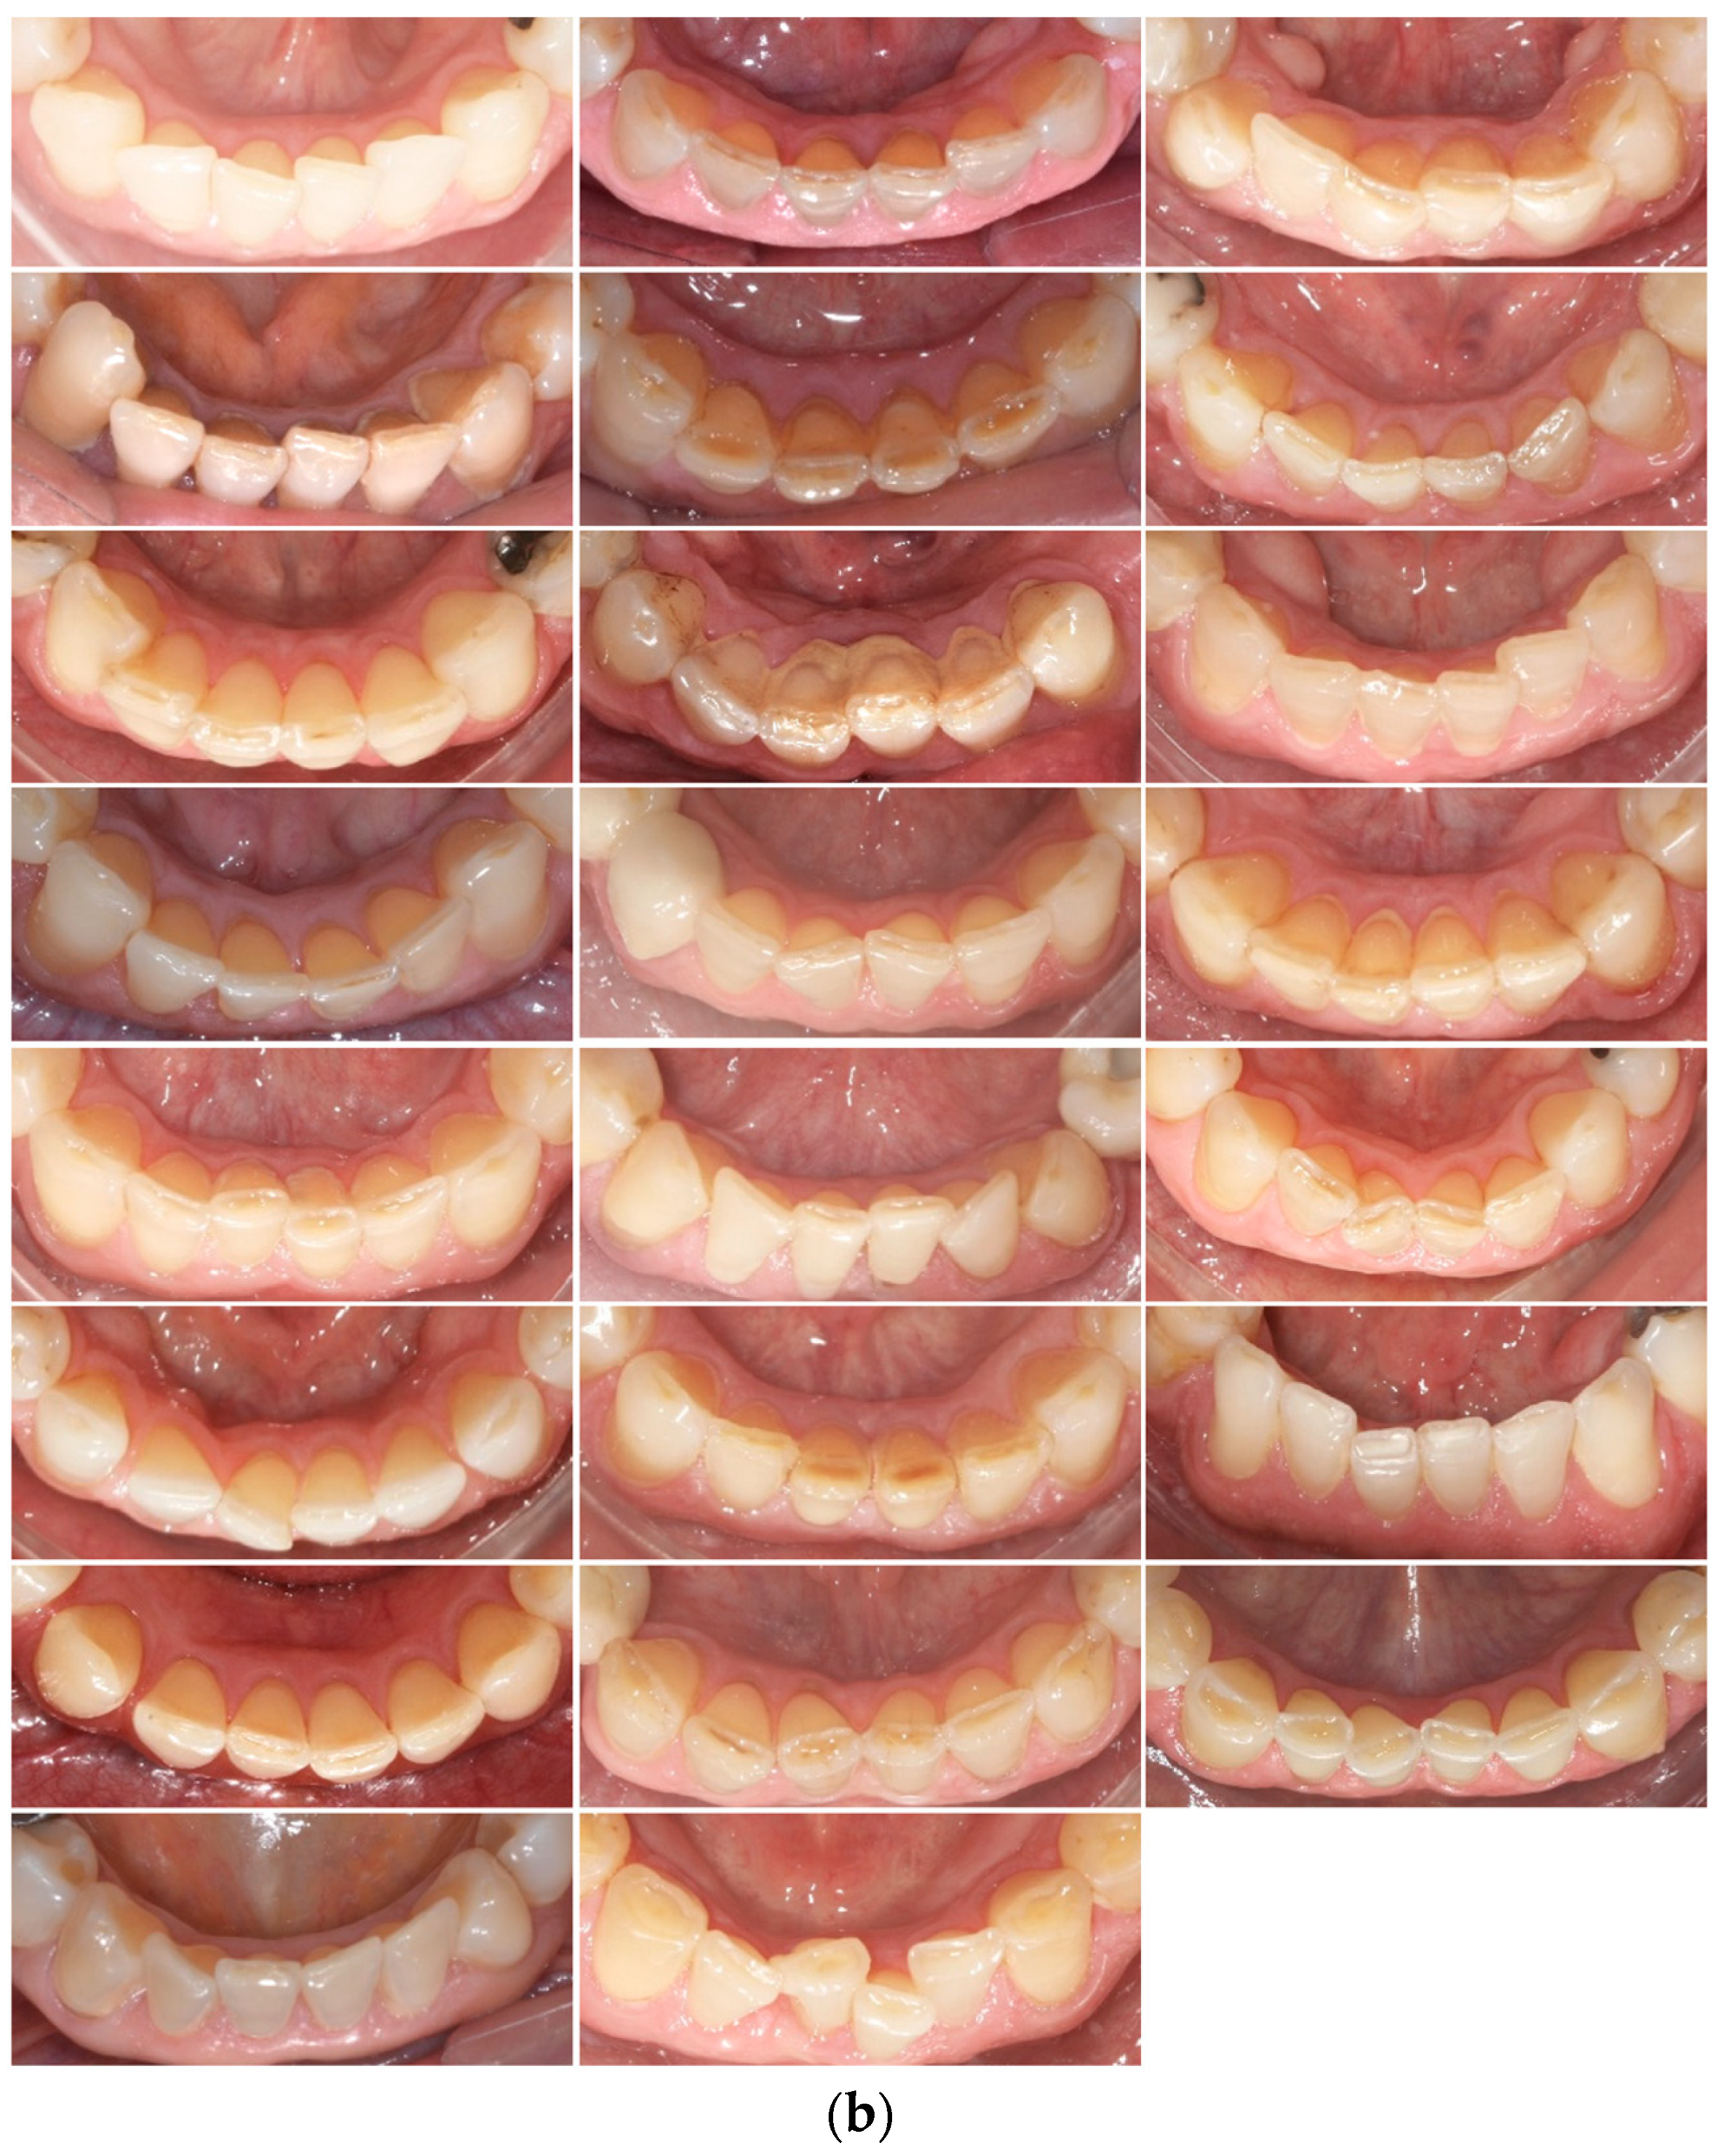 Tooth in Age | Longitudinal Occlusion: Full-Text A to Wear | Normal Free up of 60 Subjects JCM with Pioneering Erosive Study the